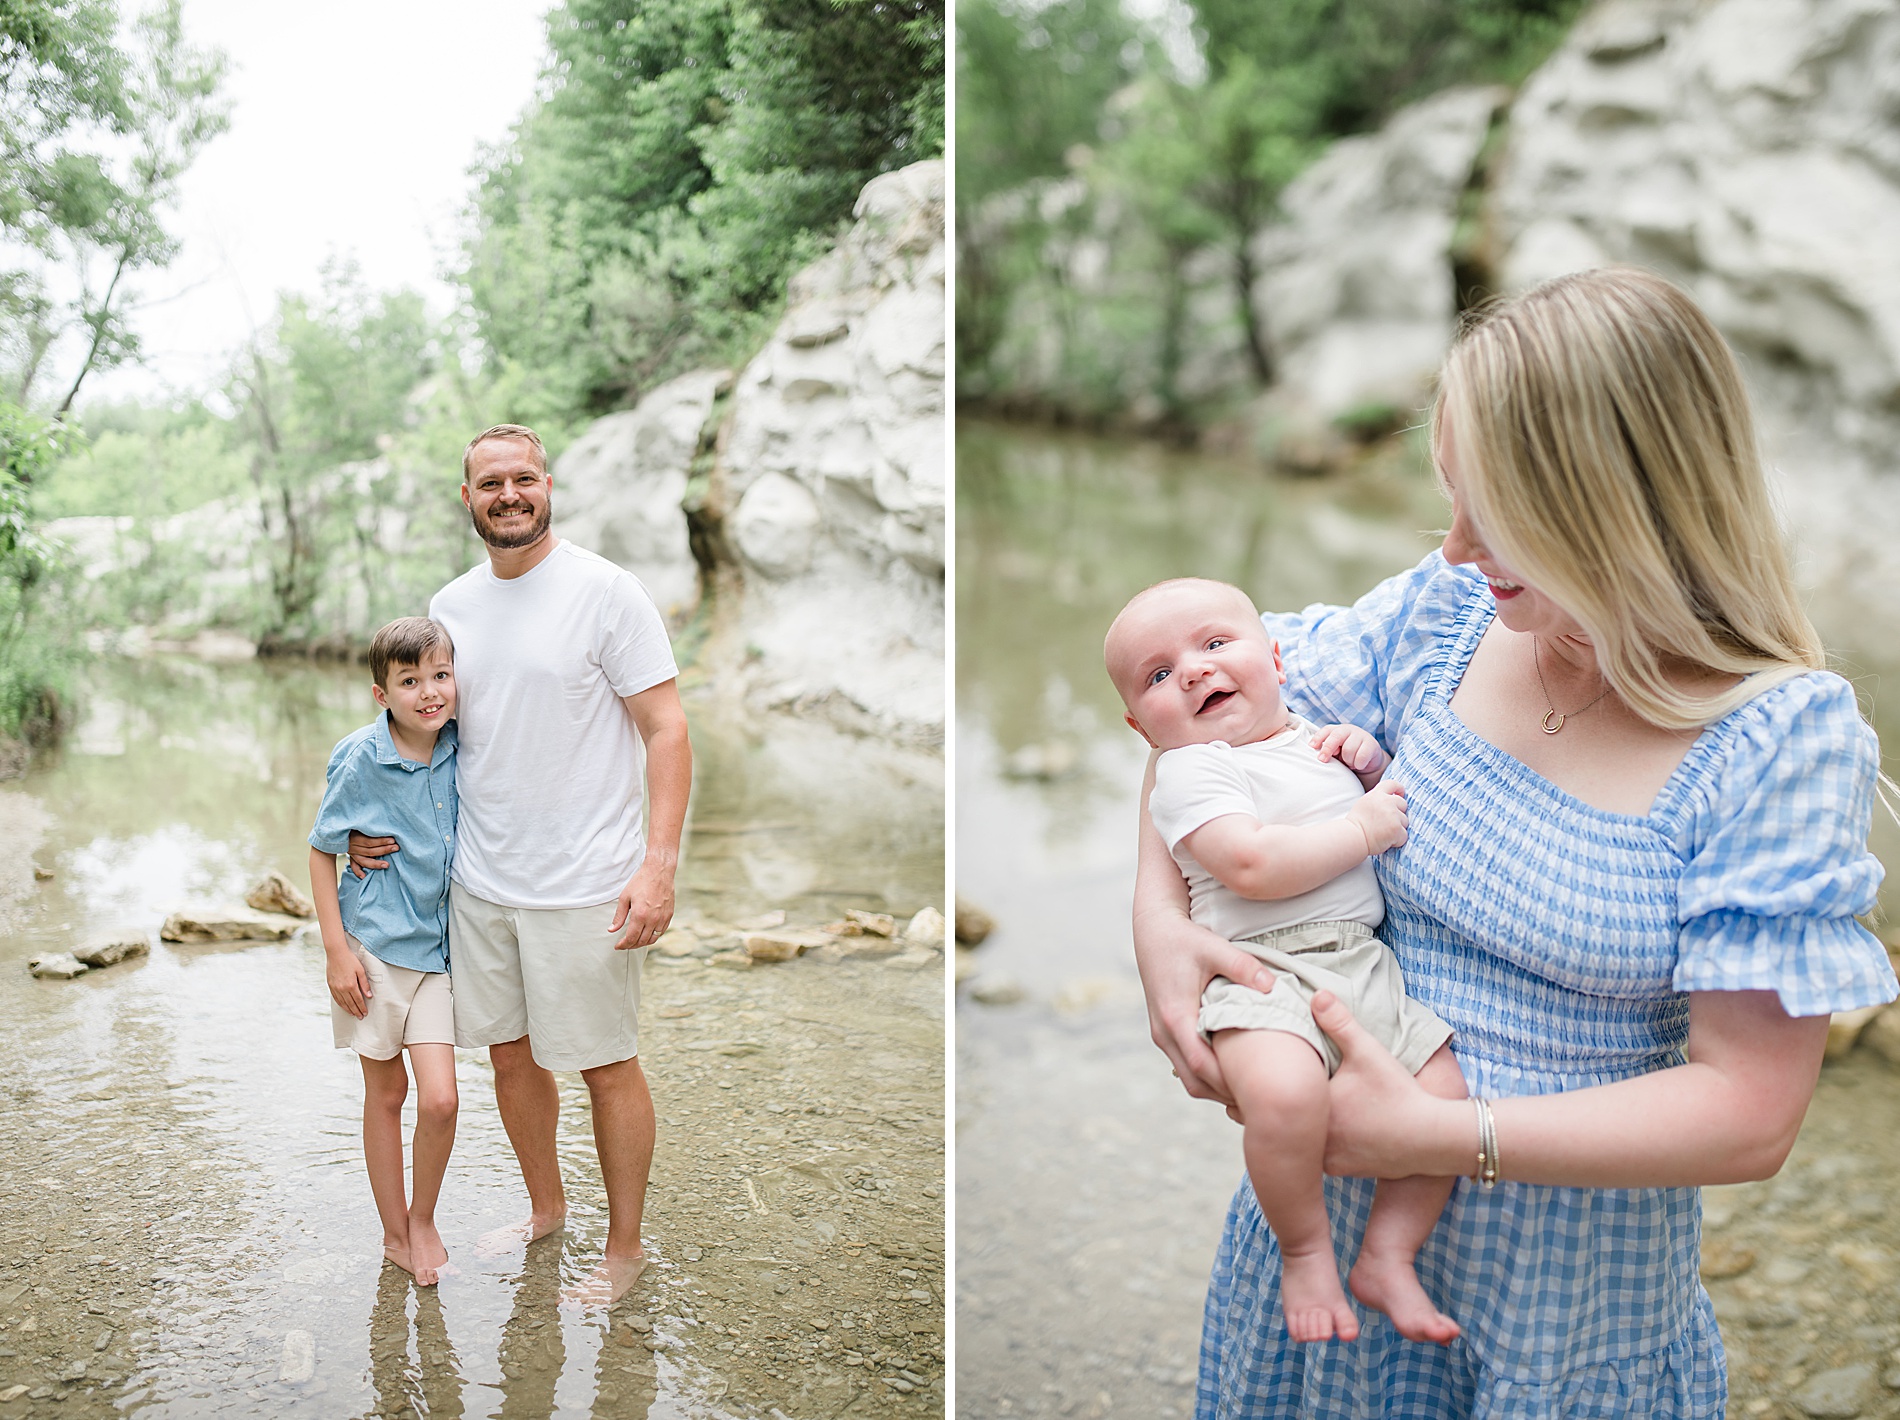 Family portaits at Creek in Frisco, TX taken by Lindsey Dutton Photography, a Dallas Family photographer
